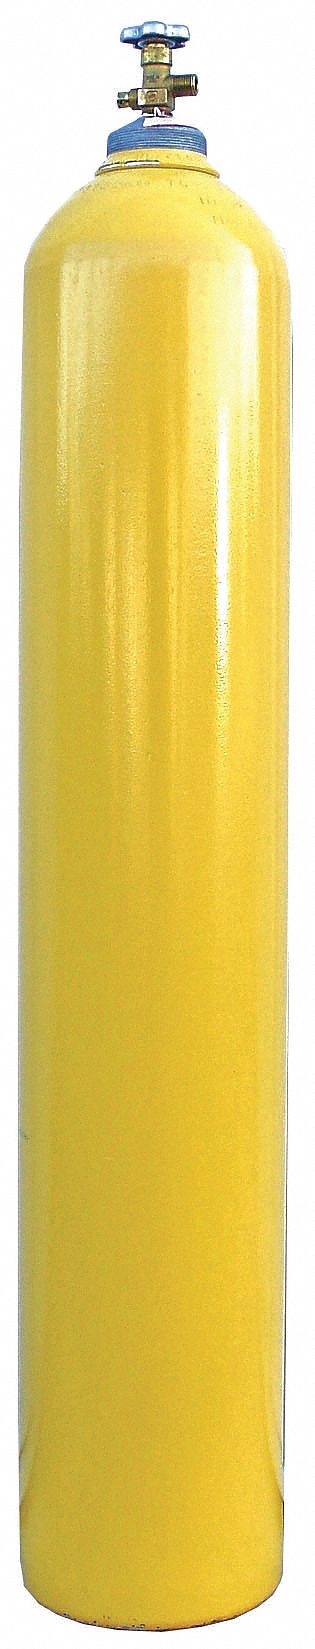 14A070 - Breathing Air Cylinder 5000 psi Steel